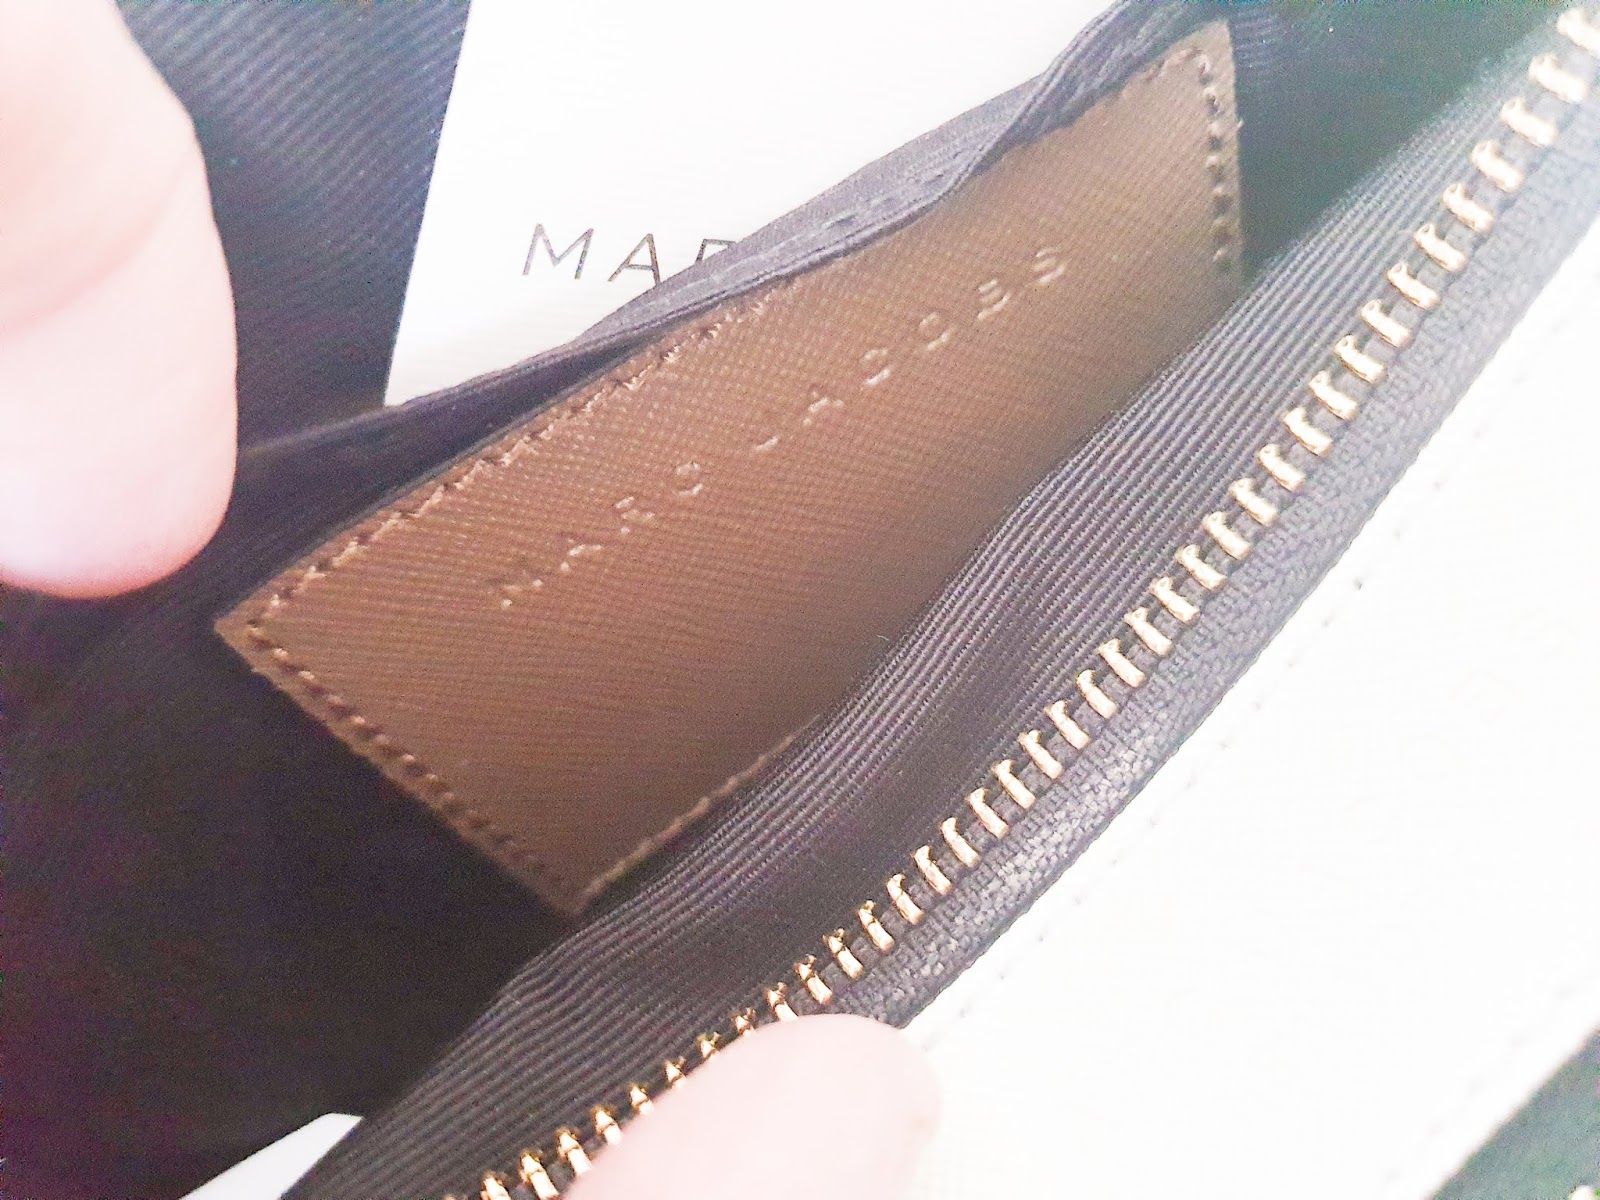 marc jacobs snapshot bag review